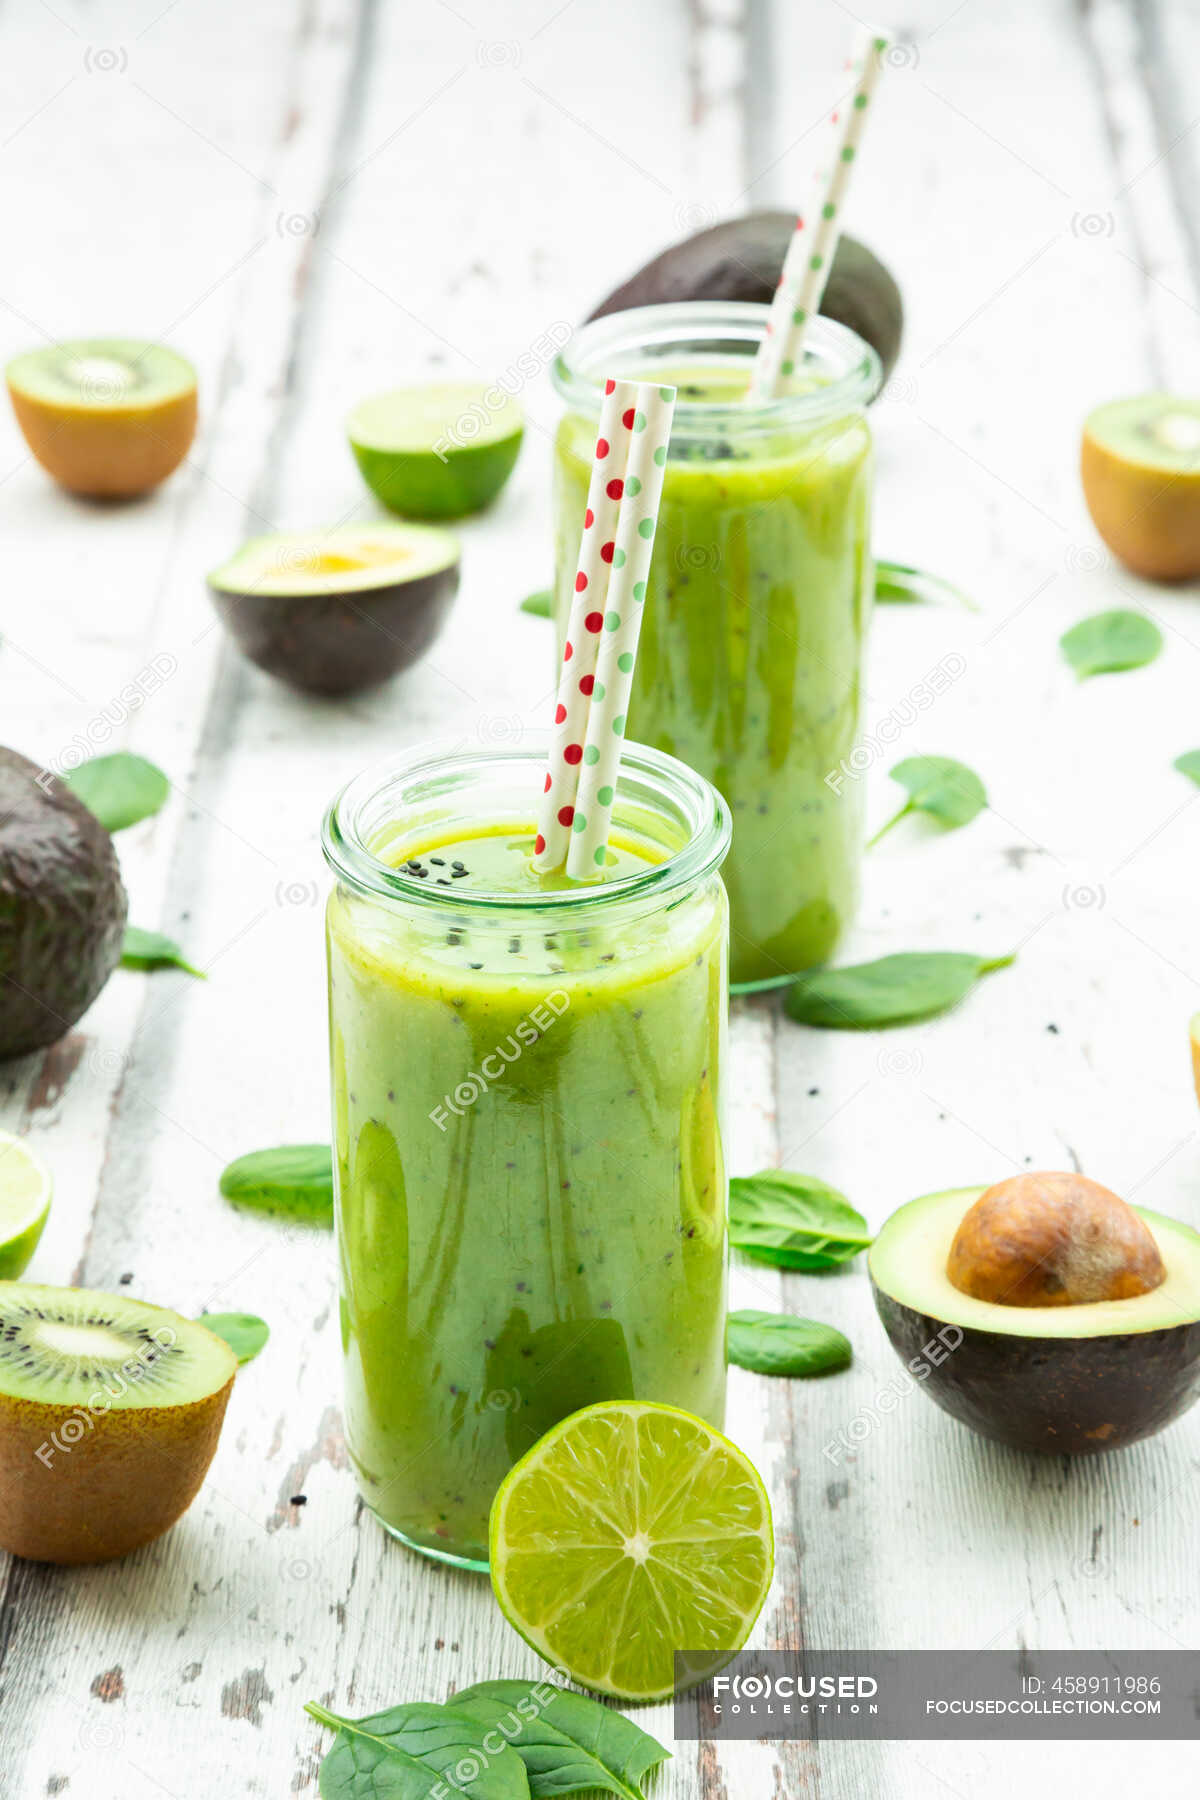 Two glasses of green smoothie with avocado, spinach, kiwi and lime — still  life, sliced - Stock Photo | #458911986